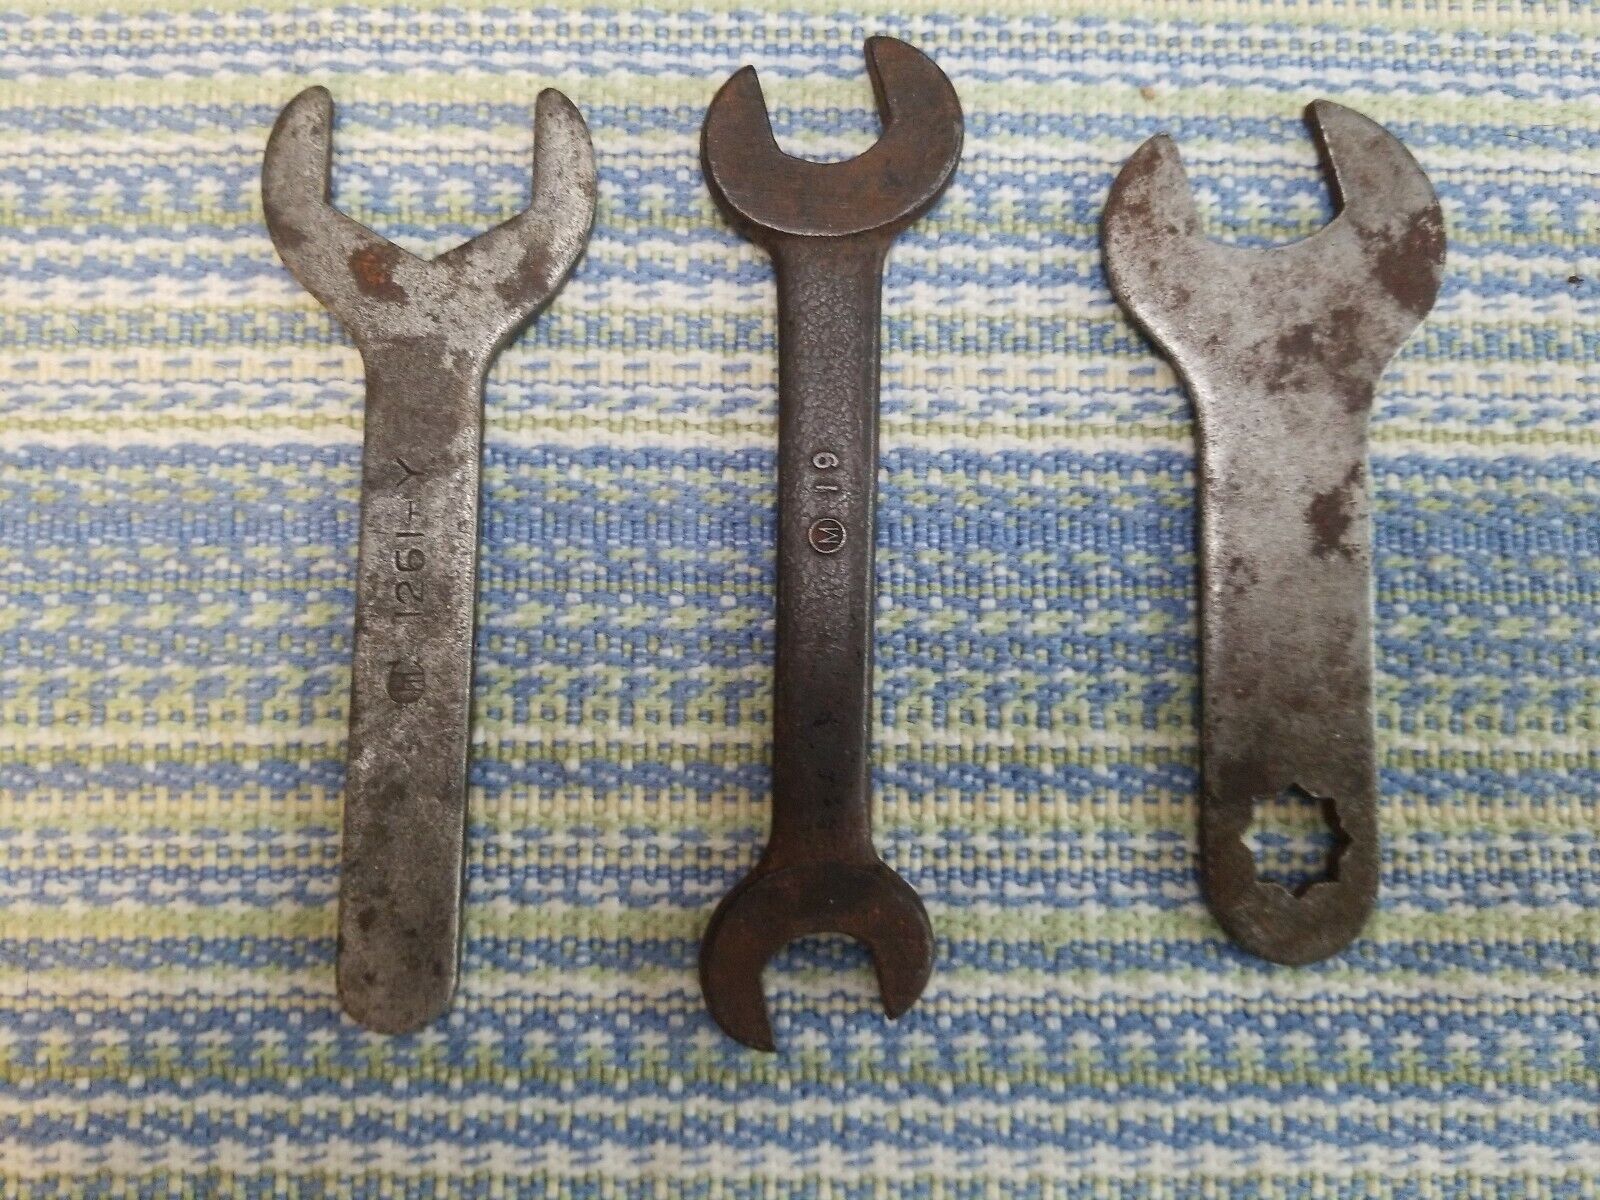 Antique International Harvester Wrenches, 1261-Y, M 19, and unmarked